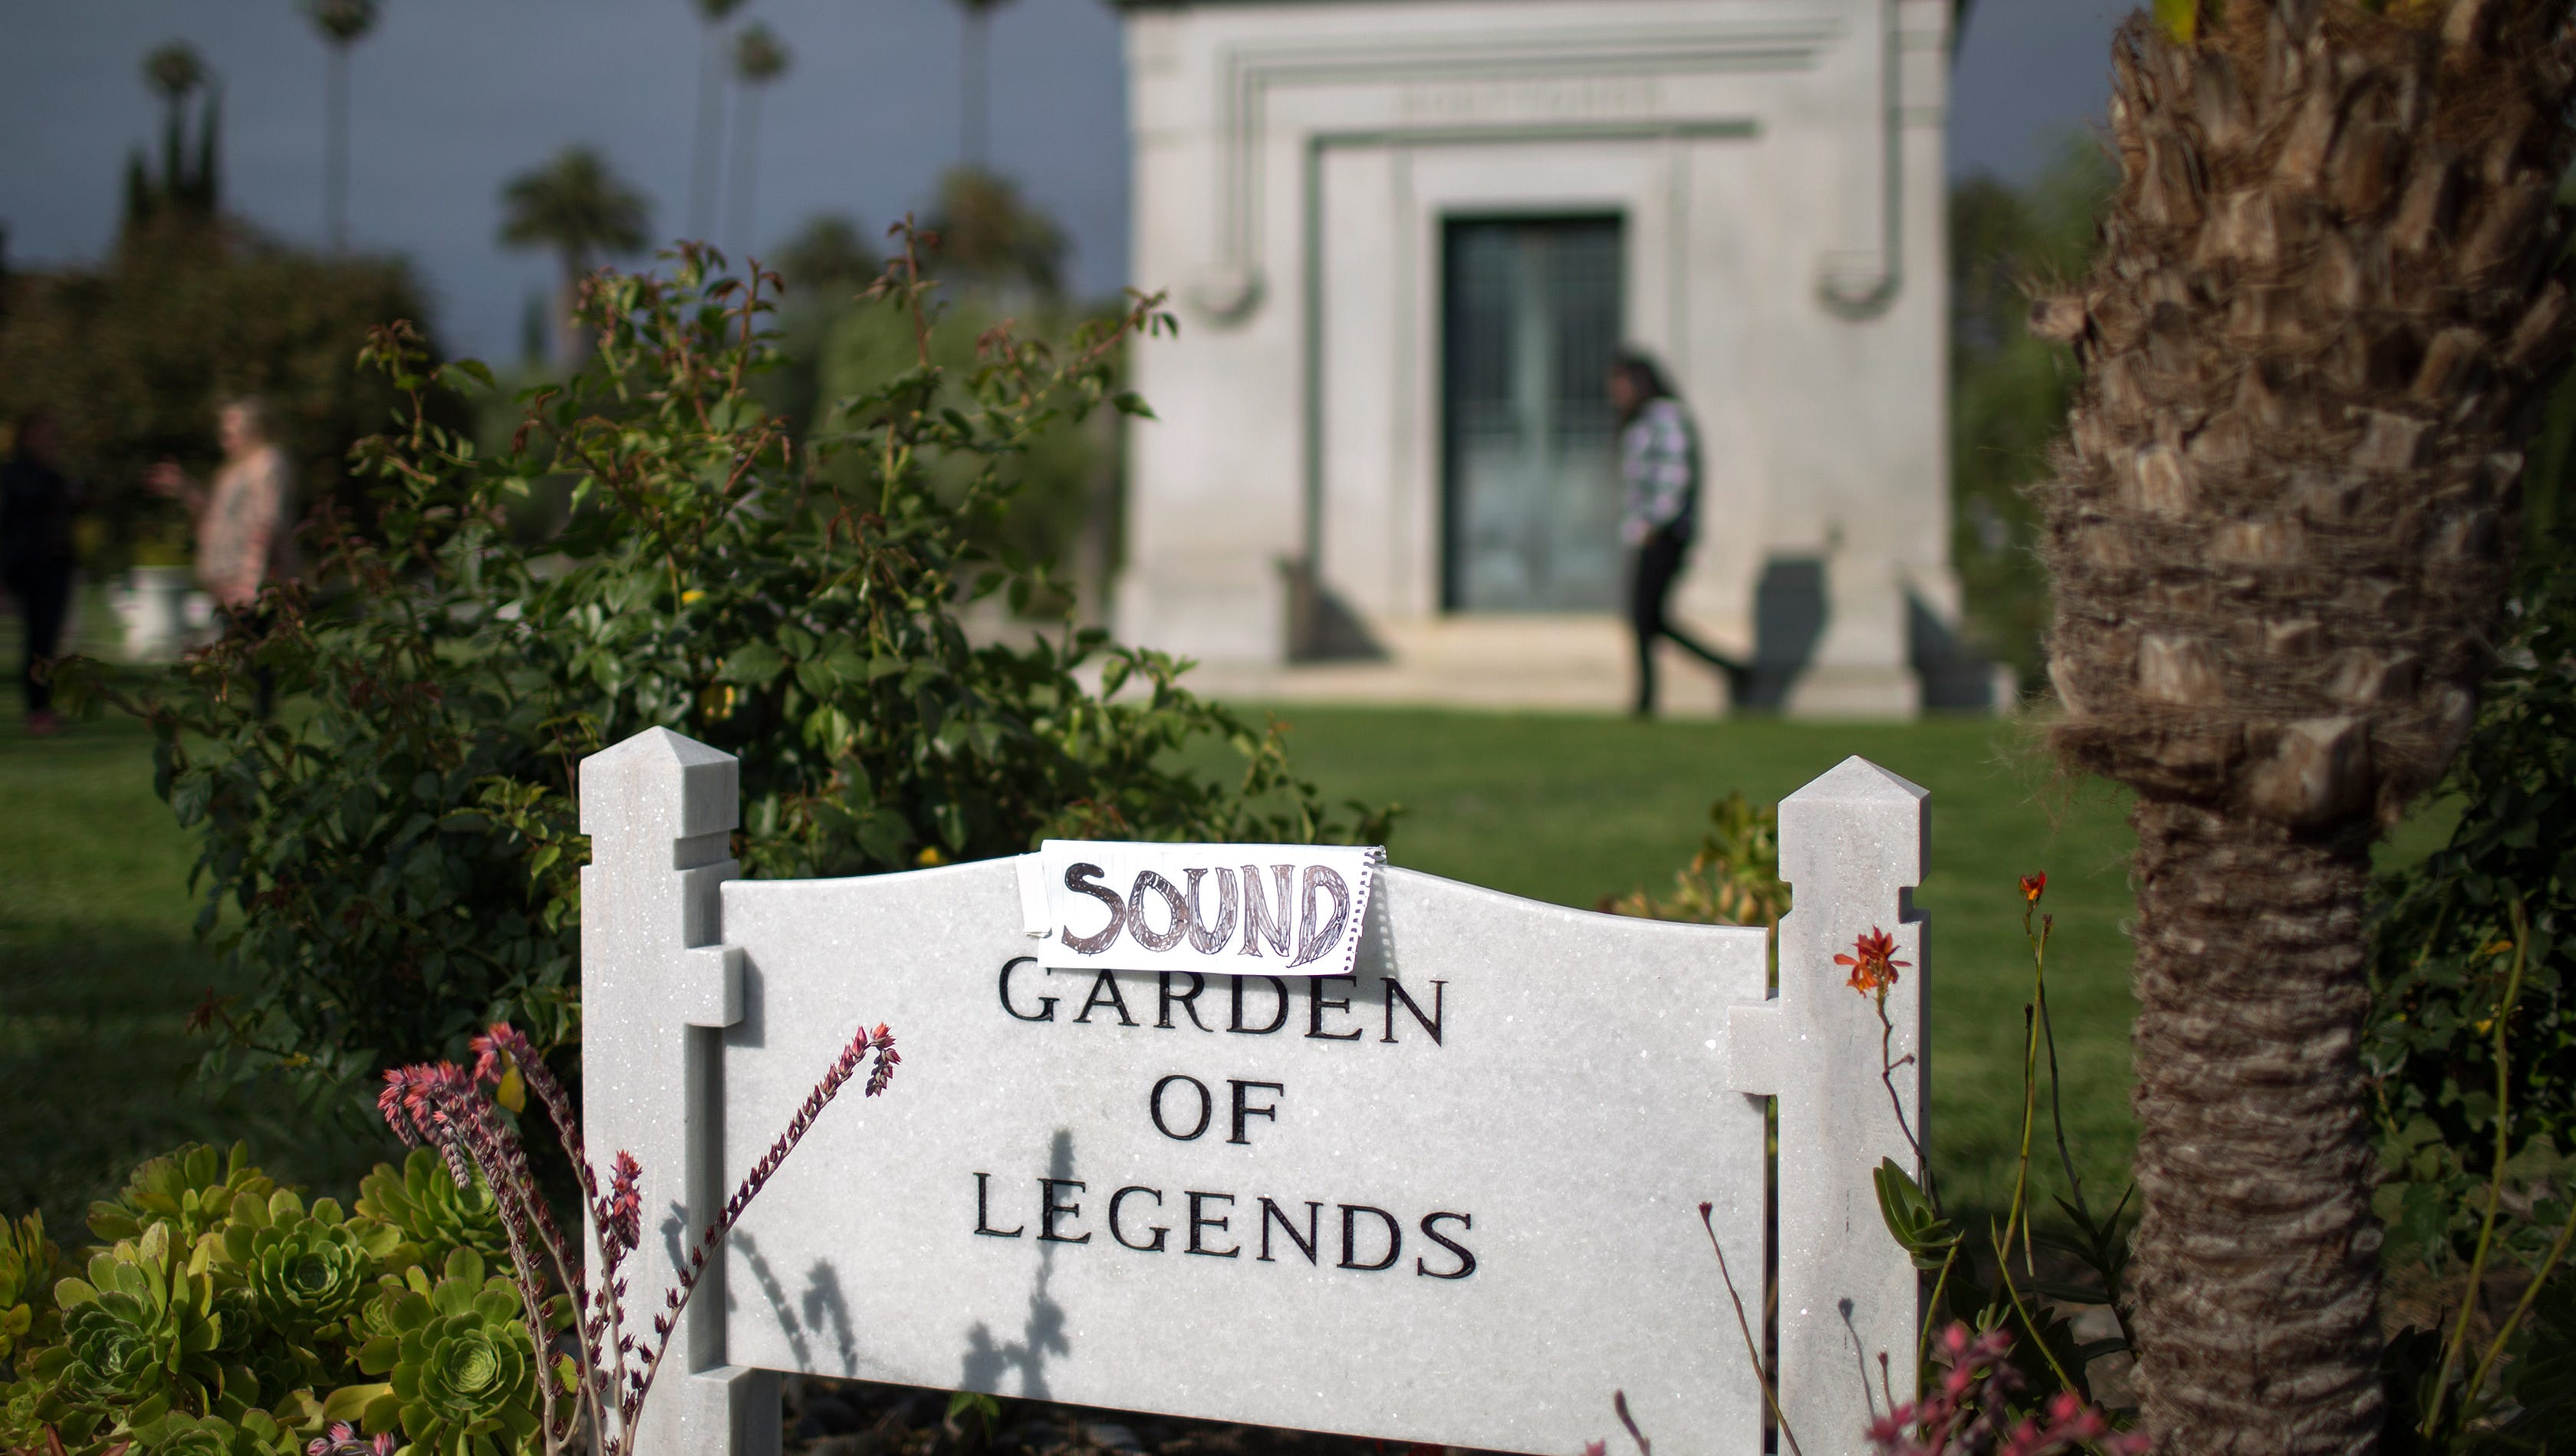 An improvised sign turns the Garden of Legends to the Sound Garden of Legends where Chris Cornell is buried.